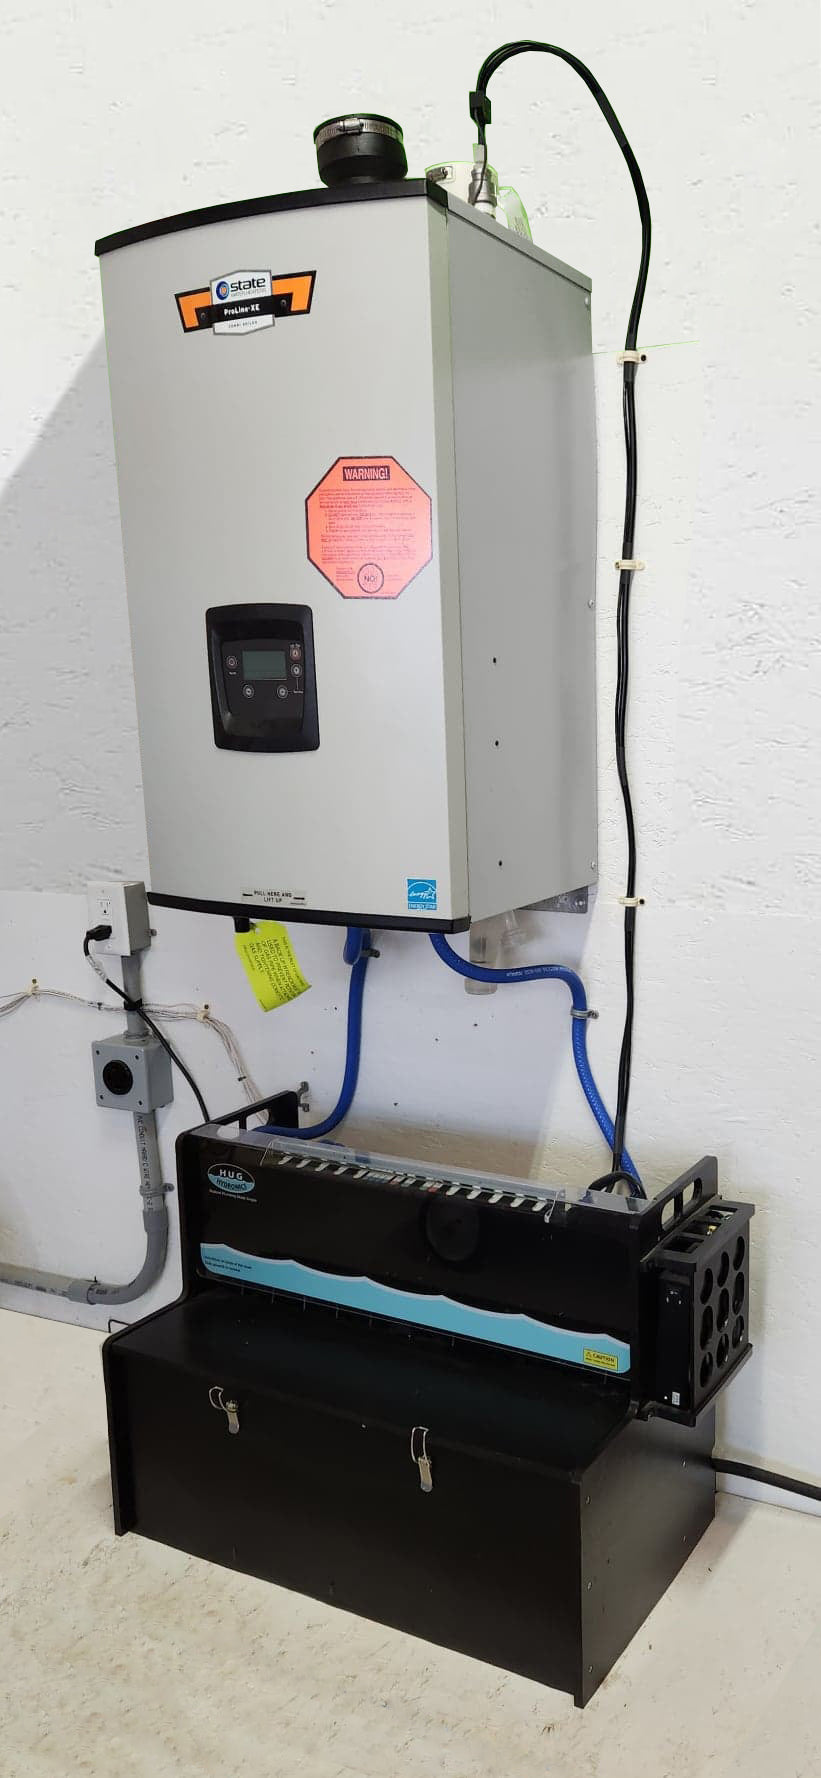 the state proline combi boiler can heat your floors and hot water at the same time, This picture shows it hooked up with the HUG hydronics in floor heating system with the adaptor